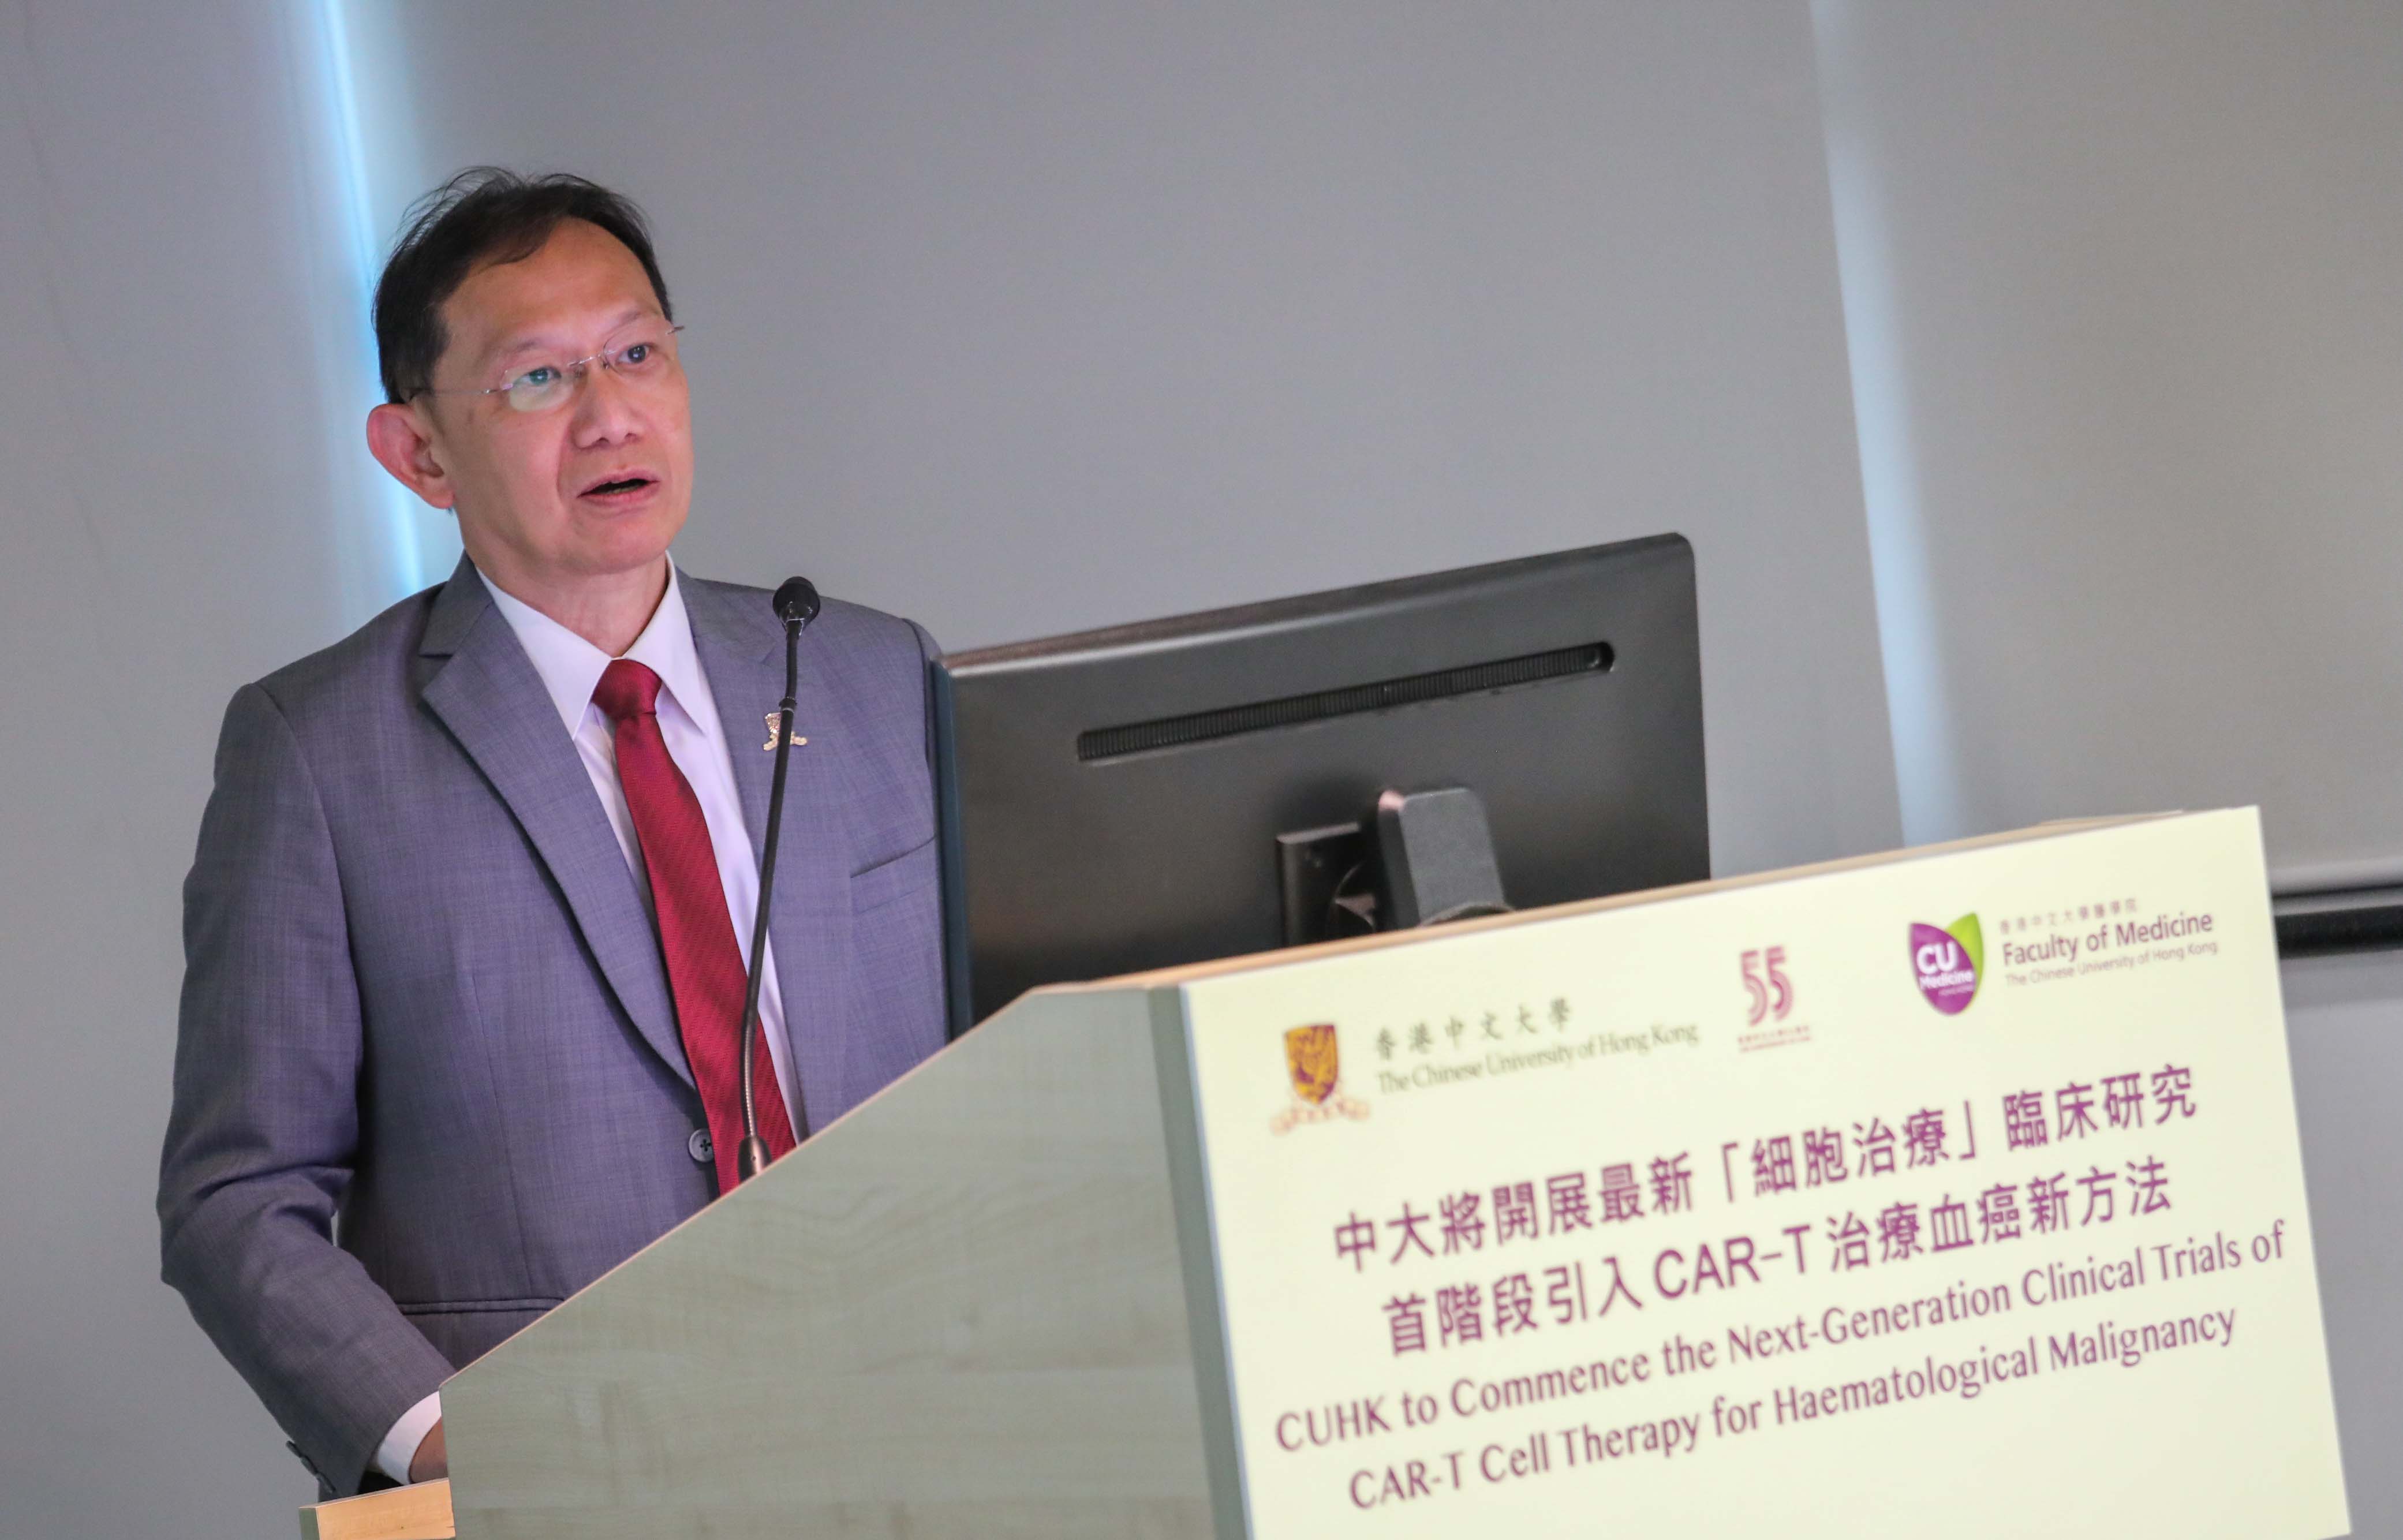 Dr. Daniel LEE, Associate Vice-President (Innovation and Enterprise) of CUHK, states that construction of the qualified laboratory for CAR-T cell therapy is expected to be completed in 2020. Clinical trials will be launched once the GMP licence is obtained.